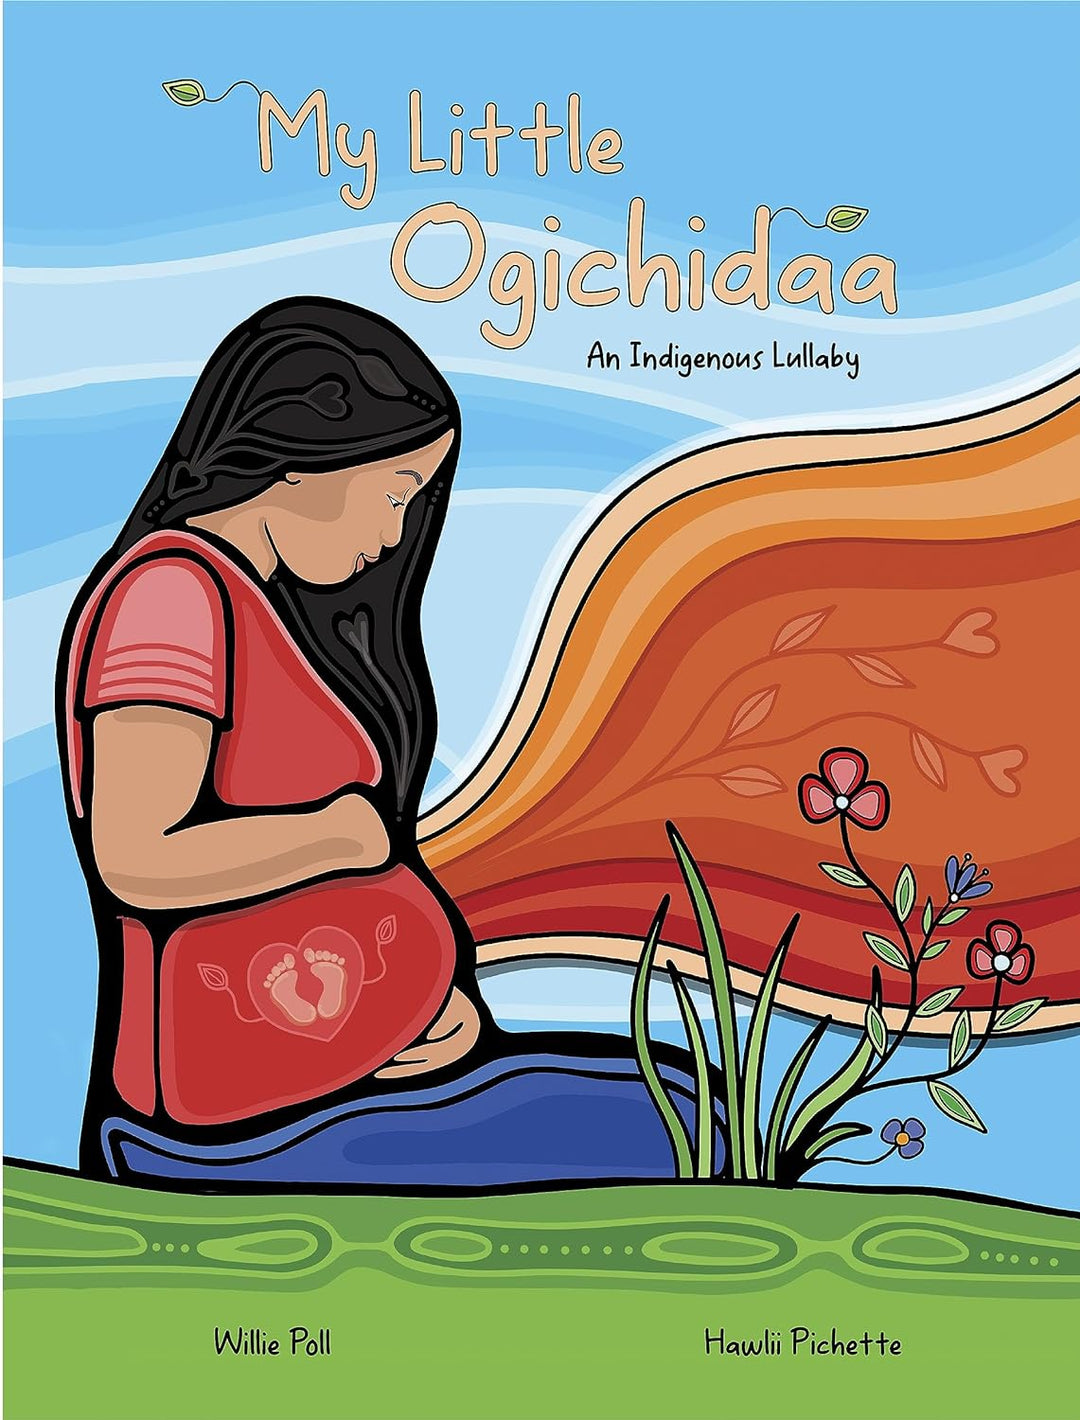 My Little Ogichidaa: An Indigenous Lullaby by Willie Poll